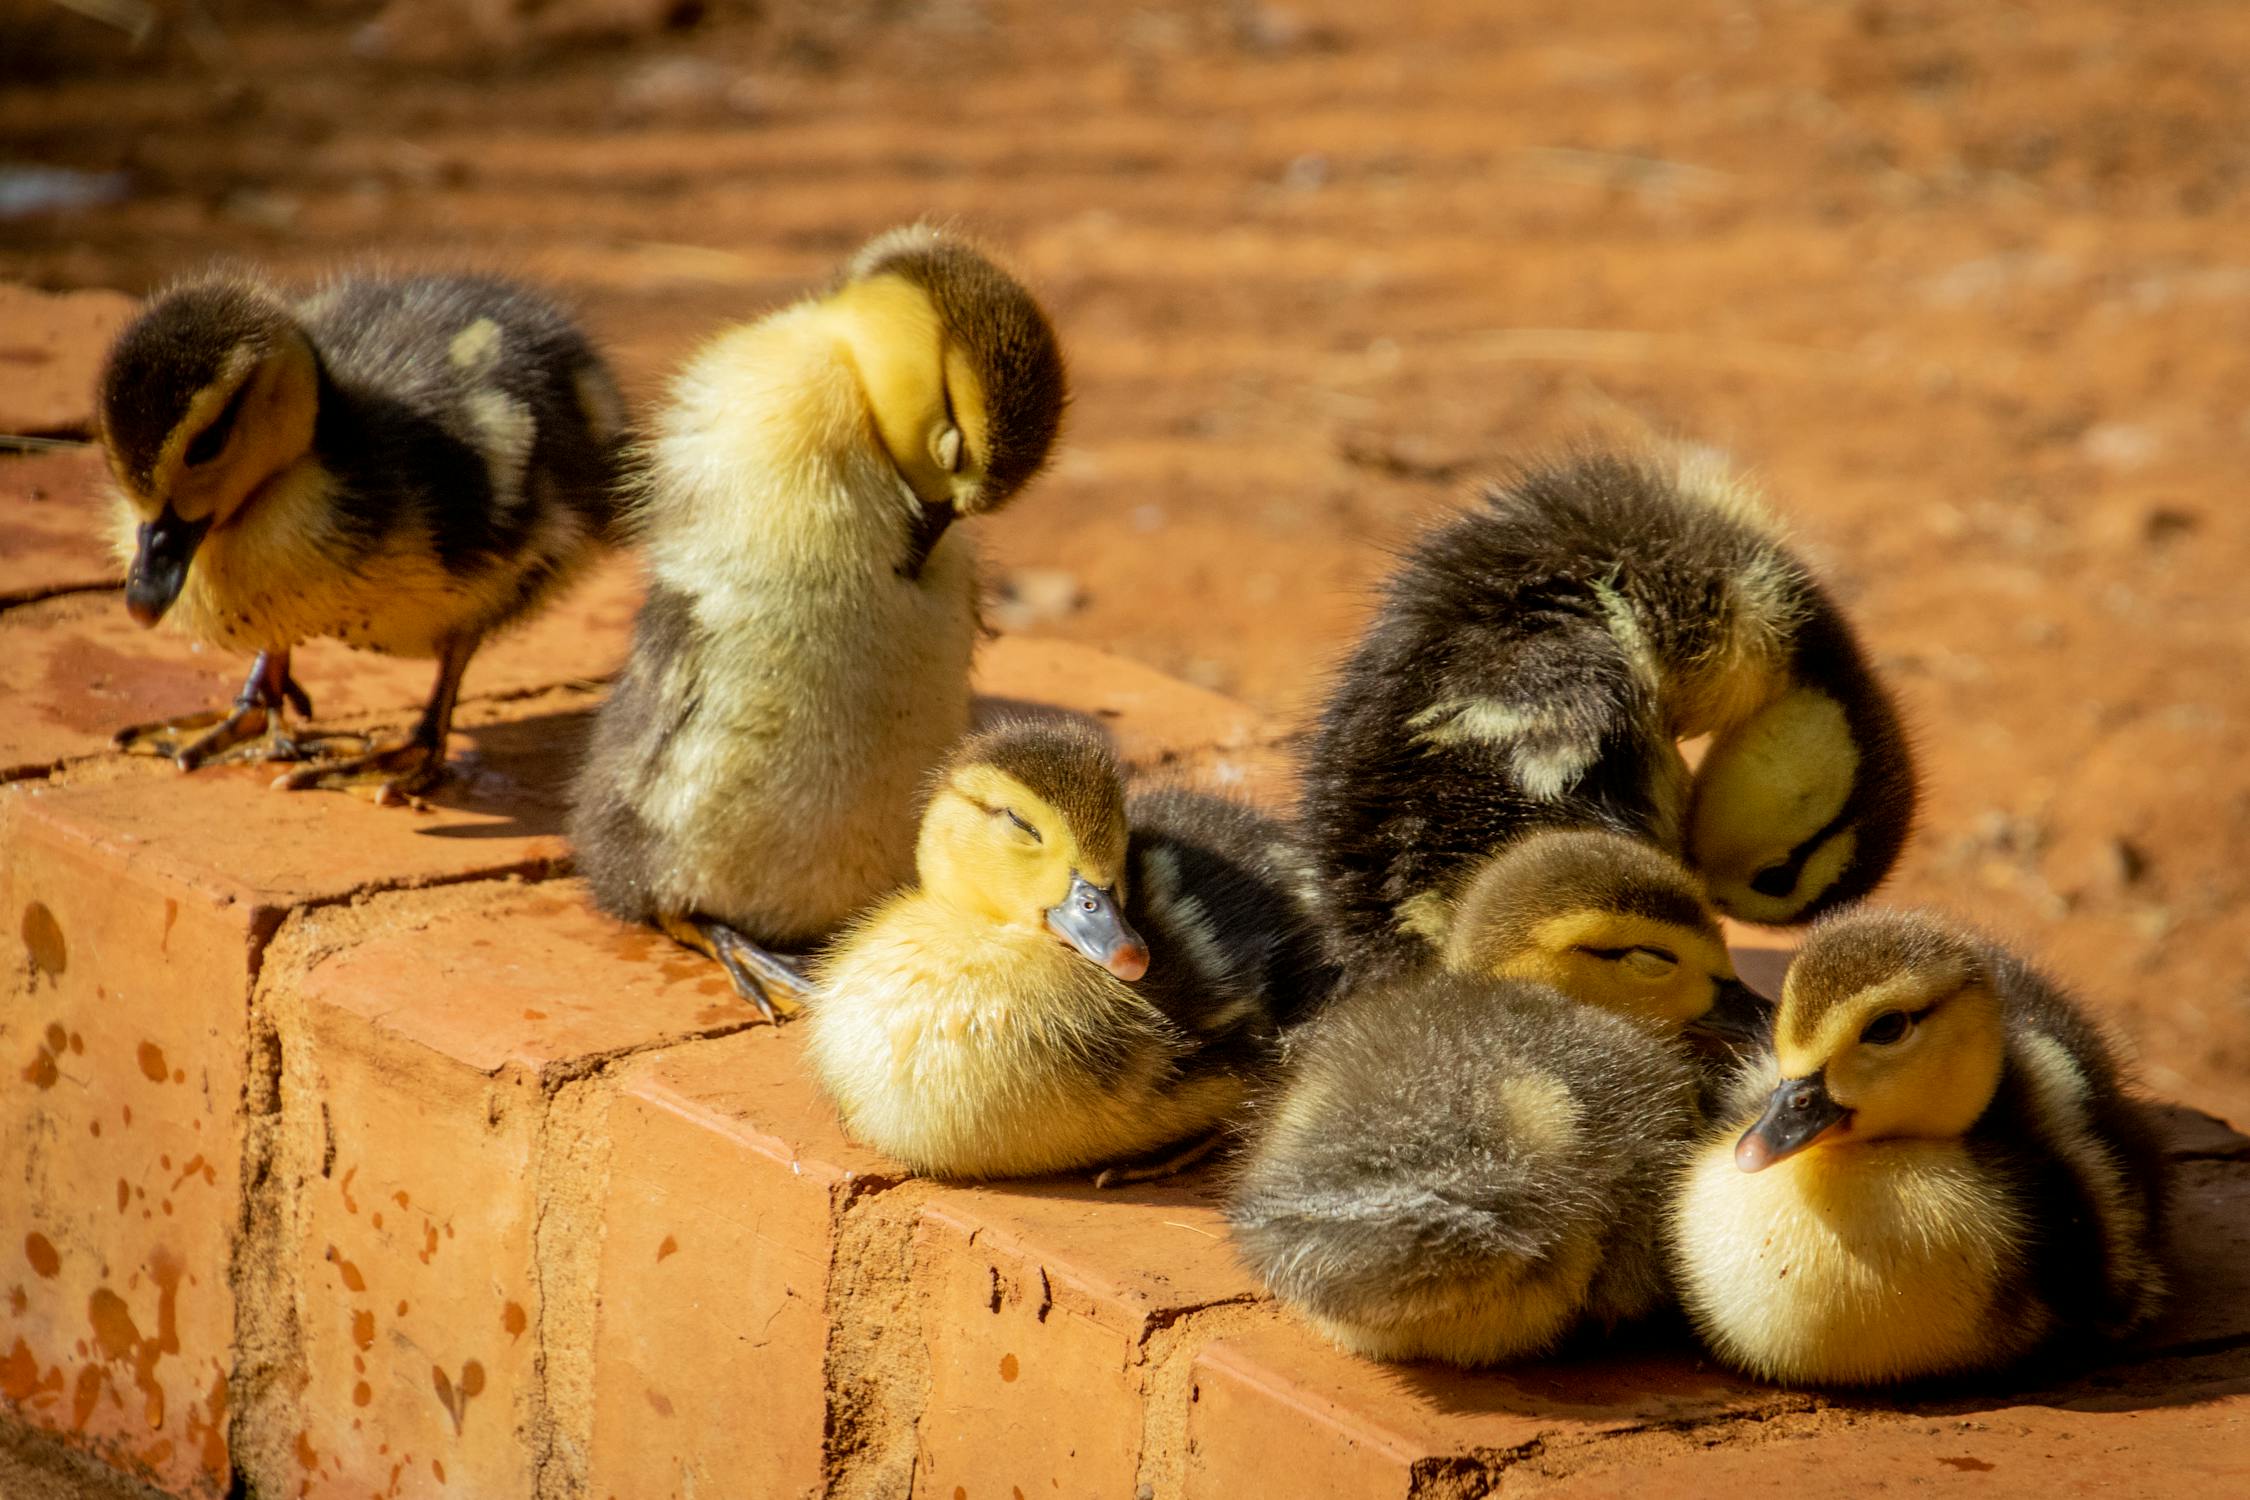 Ducklings Photo by Magda Ehlers from Pexels: https://www.pexels.com/photo/selective-focus-photo-of-flock-of-ducklings-perching-on-gray-concrete-pavement-1300355/